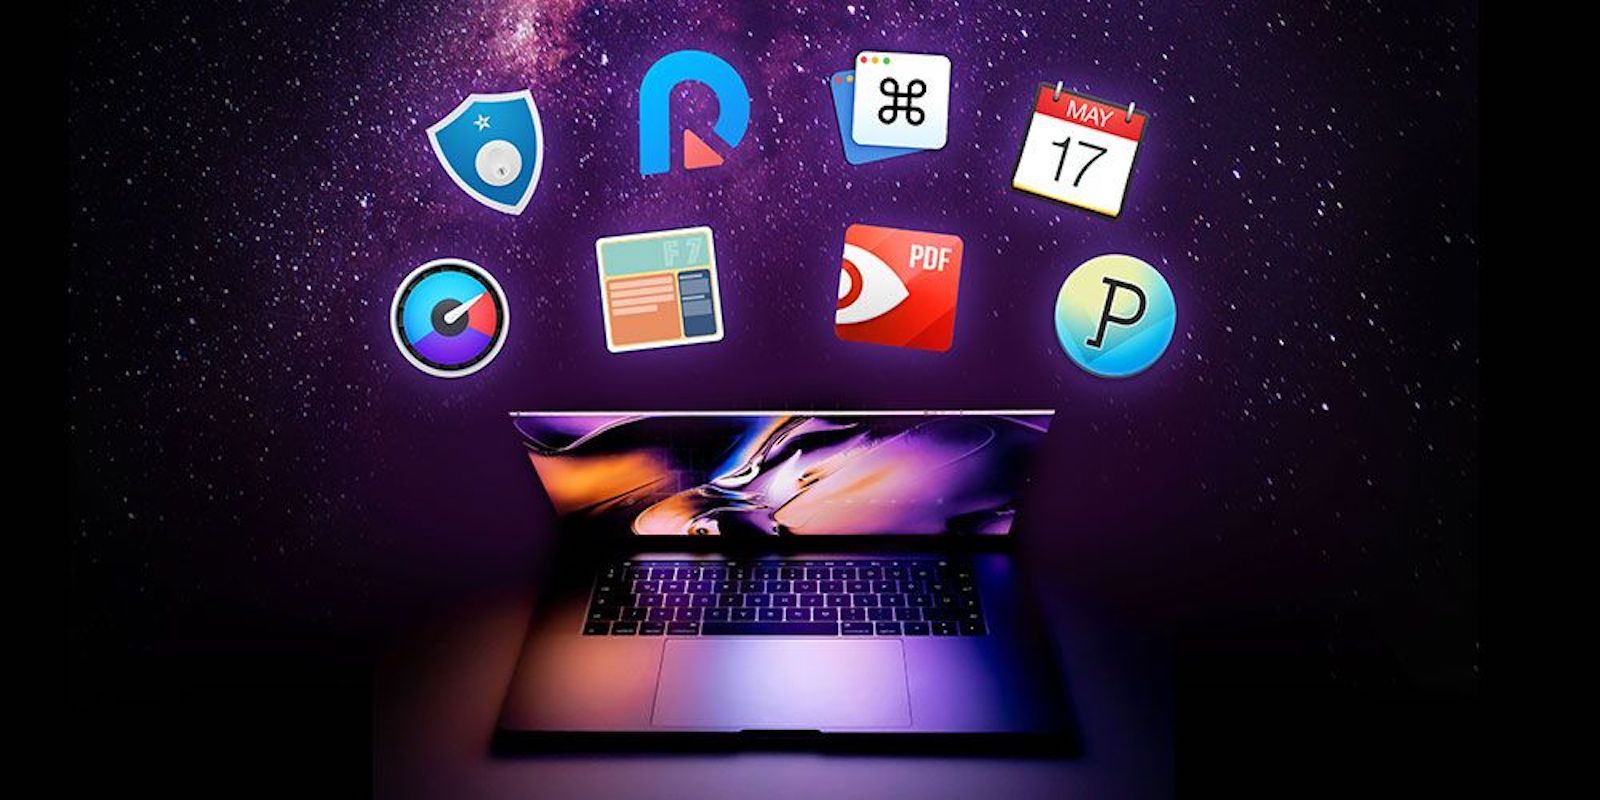 This massive bundle of 8 top apps is discounted by a whopping 93 percent.